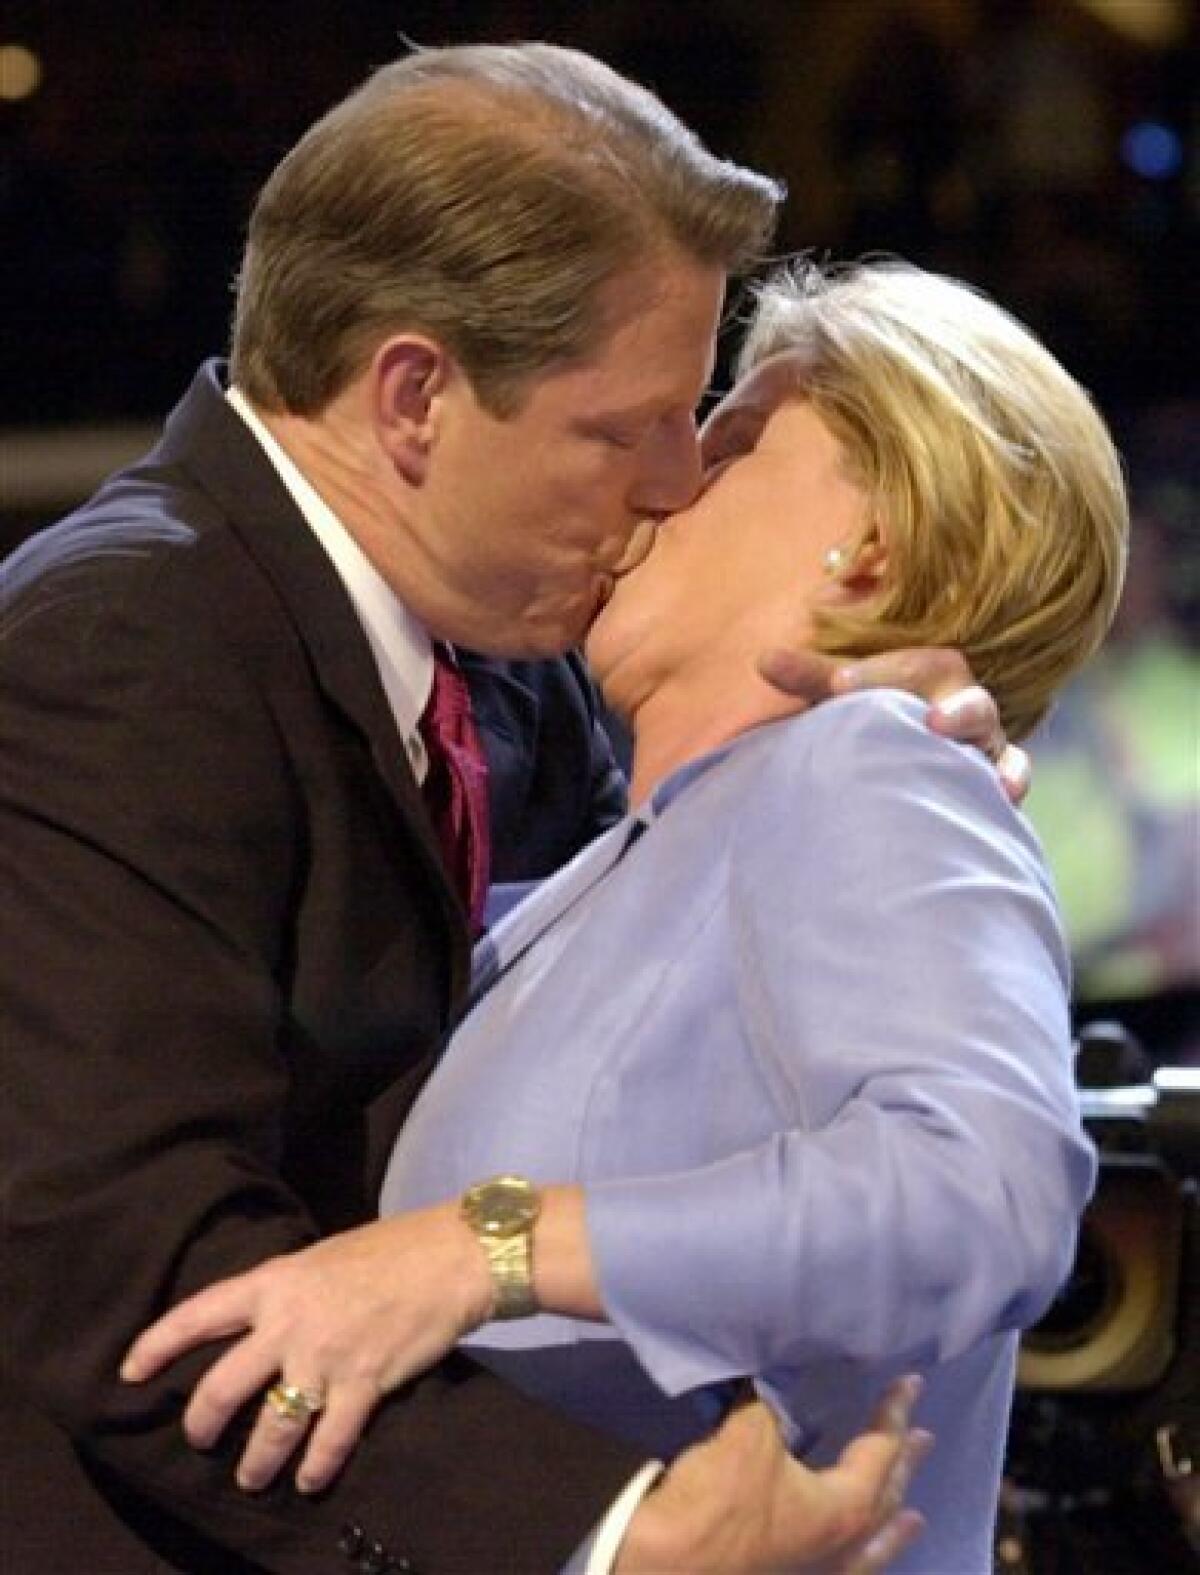 FILE - In this Aug. 17, 2000 file photo. then-Vice President Al Gore kisses his wife Tipper as he steps onto the stage at the Democratic National Convention in Los Angeles. Former Vice President Al Gore and his wife, Tipper, are separating after 40 years of marriage. (AP Photo/Stephen Savoia, File)